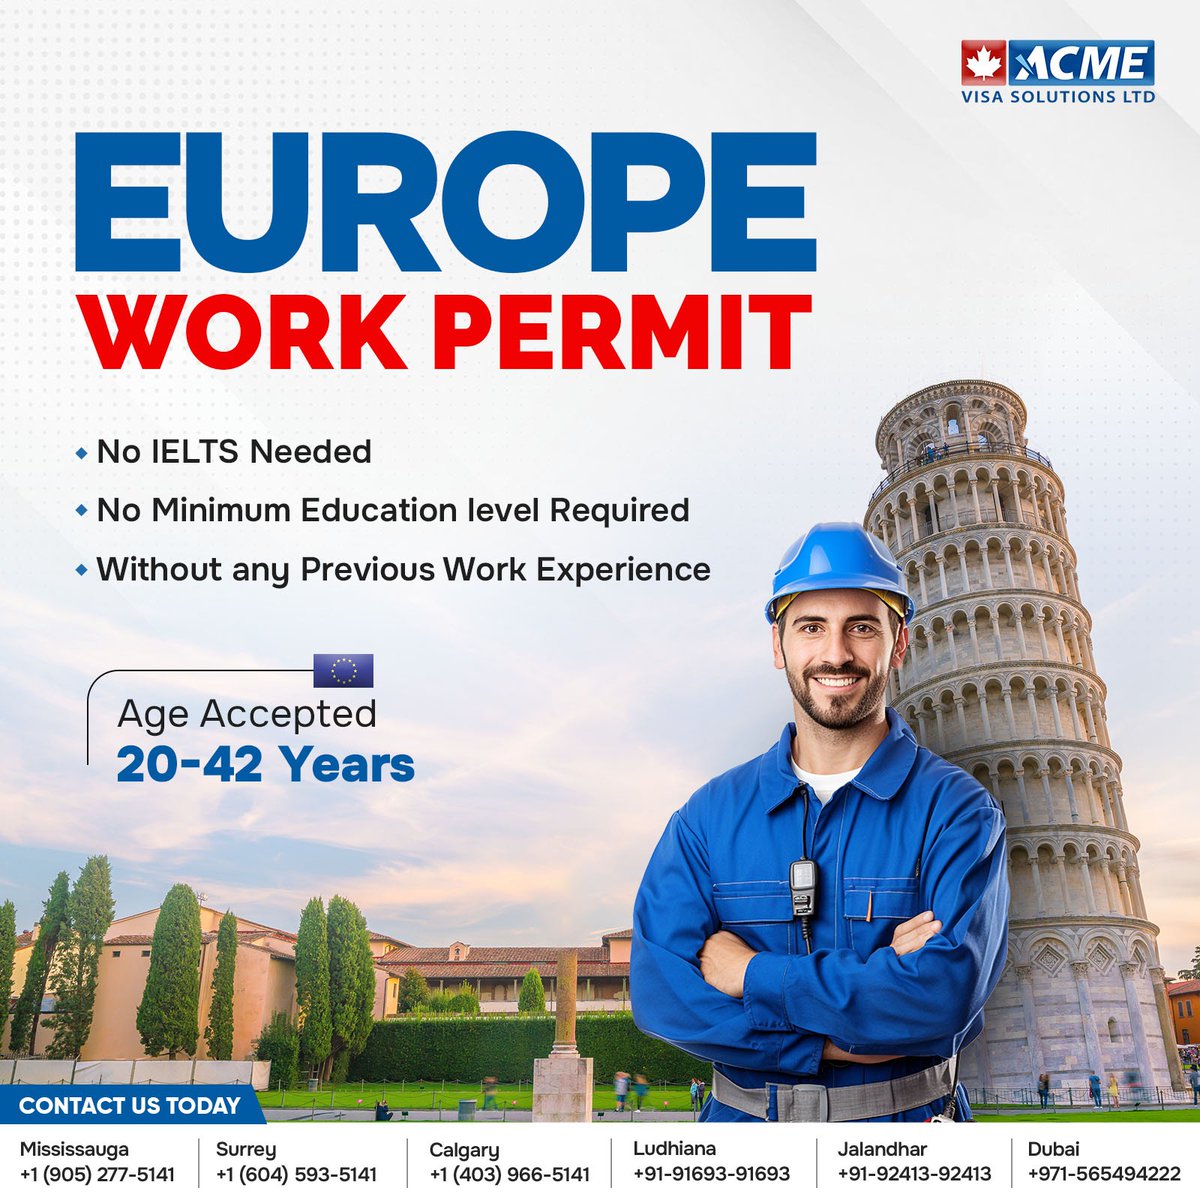 Fulfill your dream of working in Europe hassle-free!🇪🇺

With Acme Visa Solutions, you can secure a work permit without the need for IELTS, a minimum education level, or previous work experience 👷🏼

#ACMEVisaSolutions #EuropeWorkPermit #SettleInEurope #EuropeWorkVisa #Europe